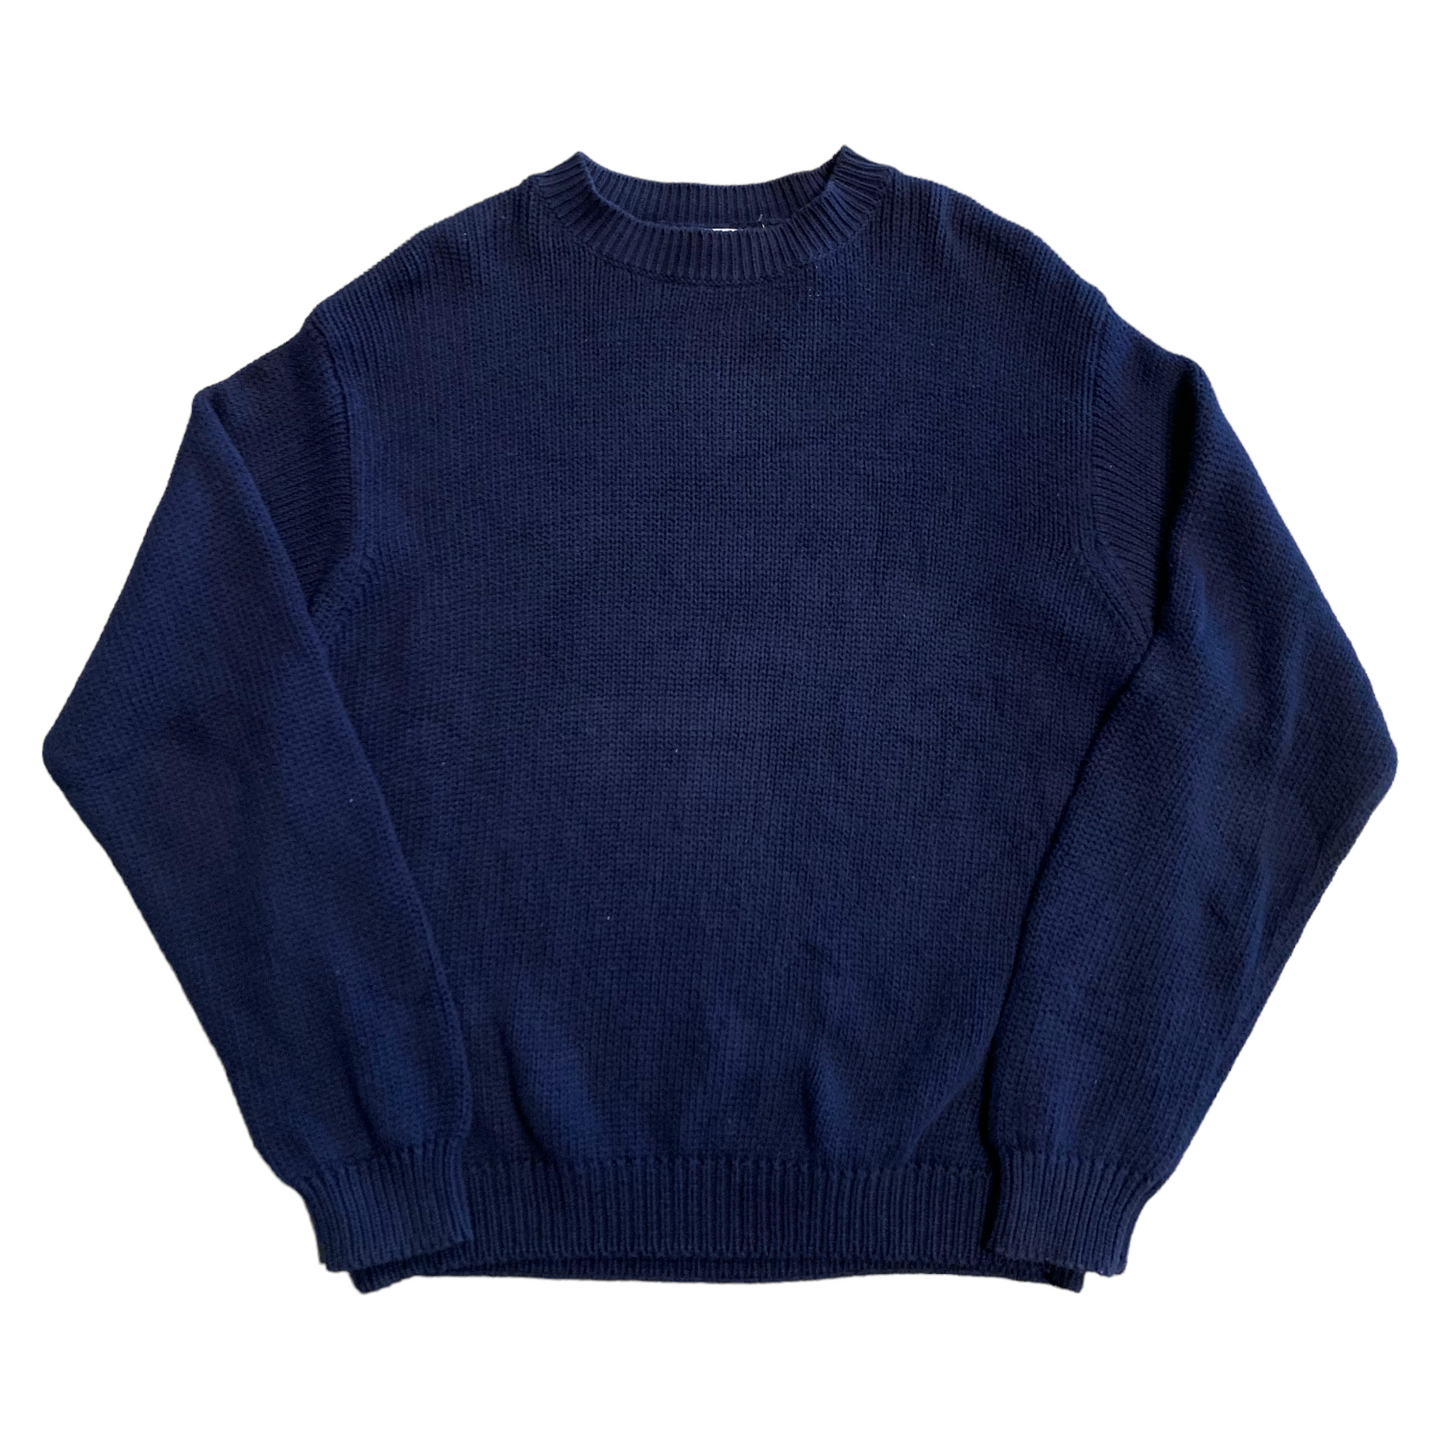 UC of Benetton Knit Sweater L